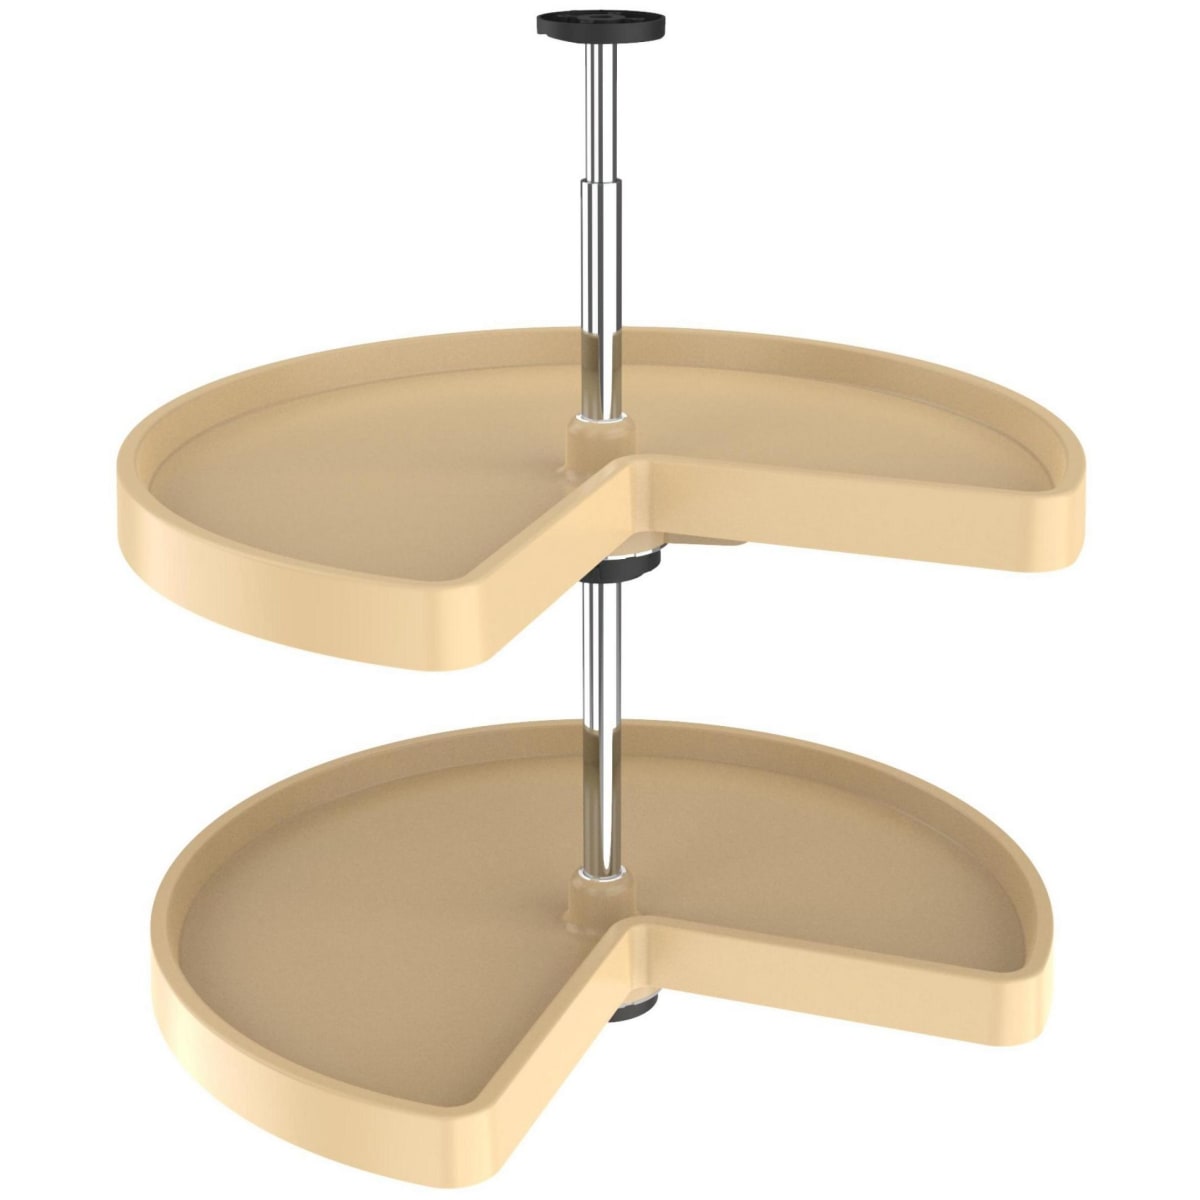 Rev-A-Shelf Sink Base Drip Tray for Sink Cabinets in Almond